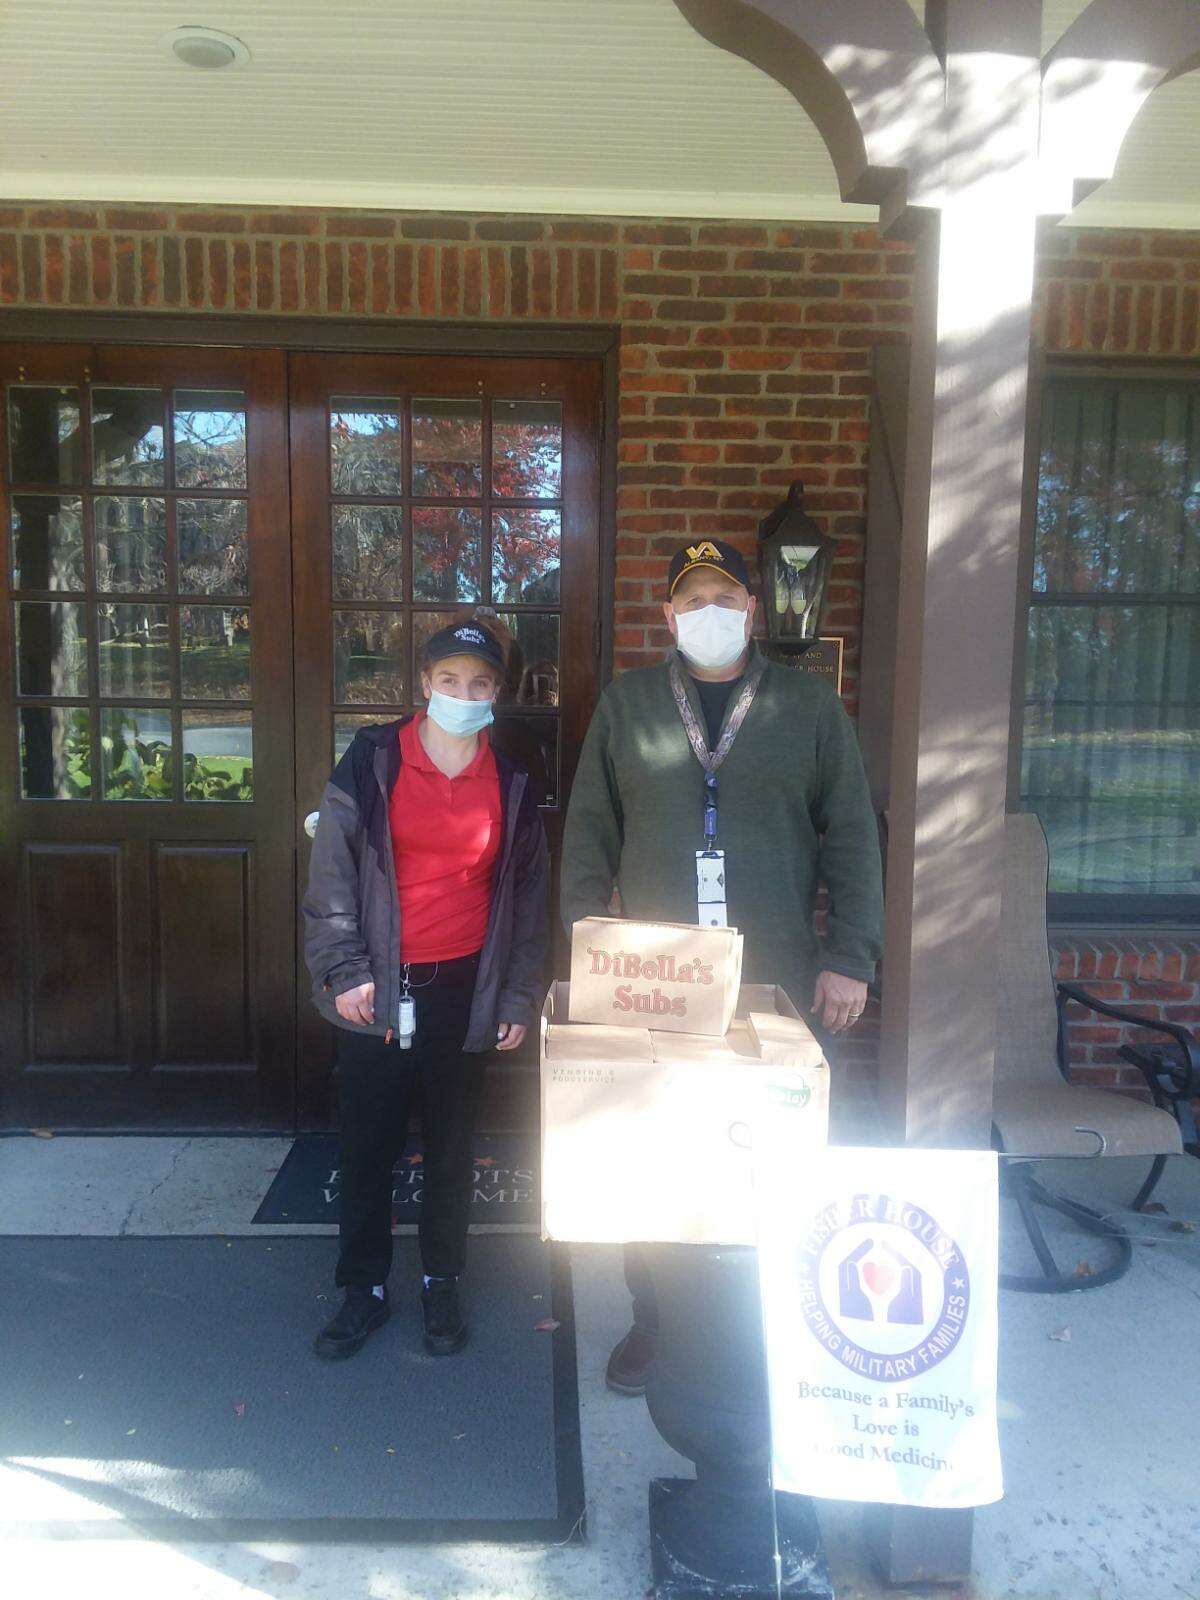 DiBella’s Subs donated and delivered the first round of boxed lunches to Fisher House at the Albany Stratton VA Medical Center to feed veterans and their families staying at the house.